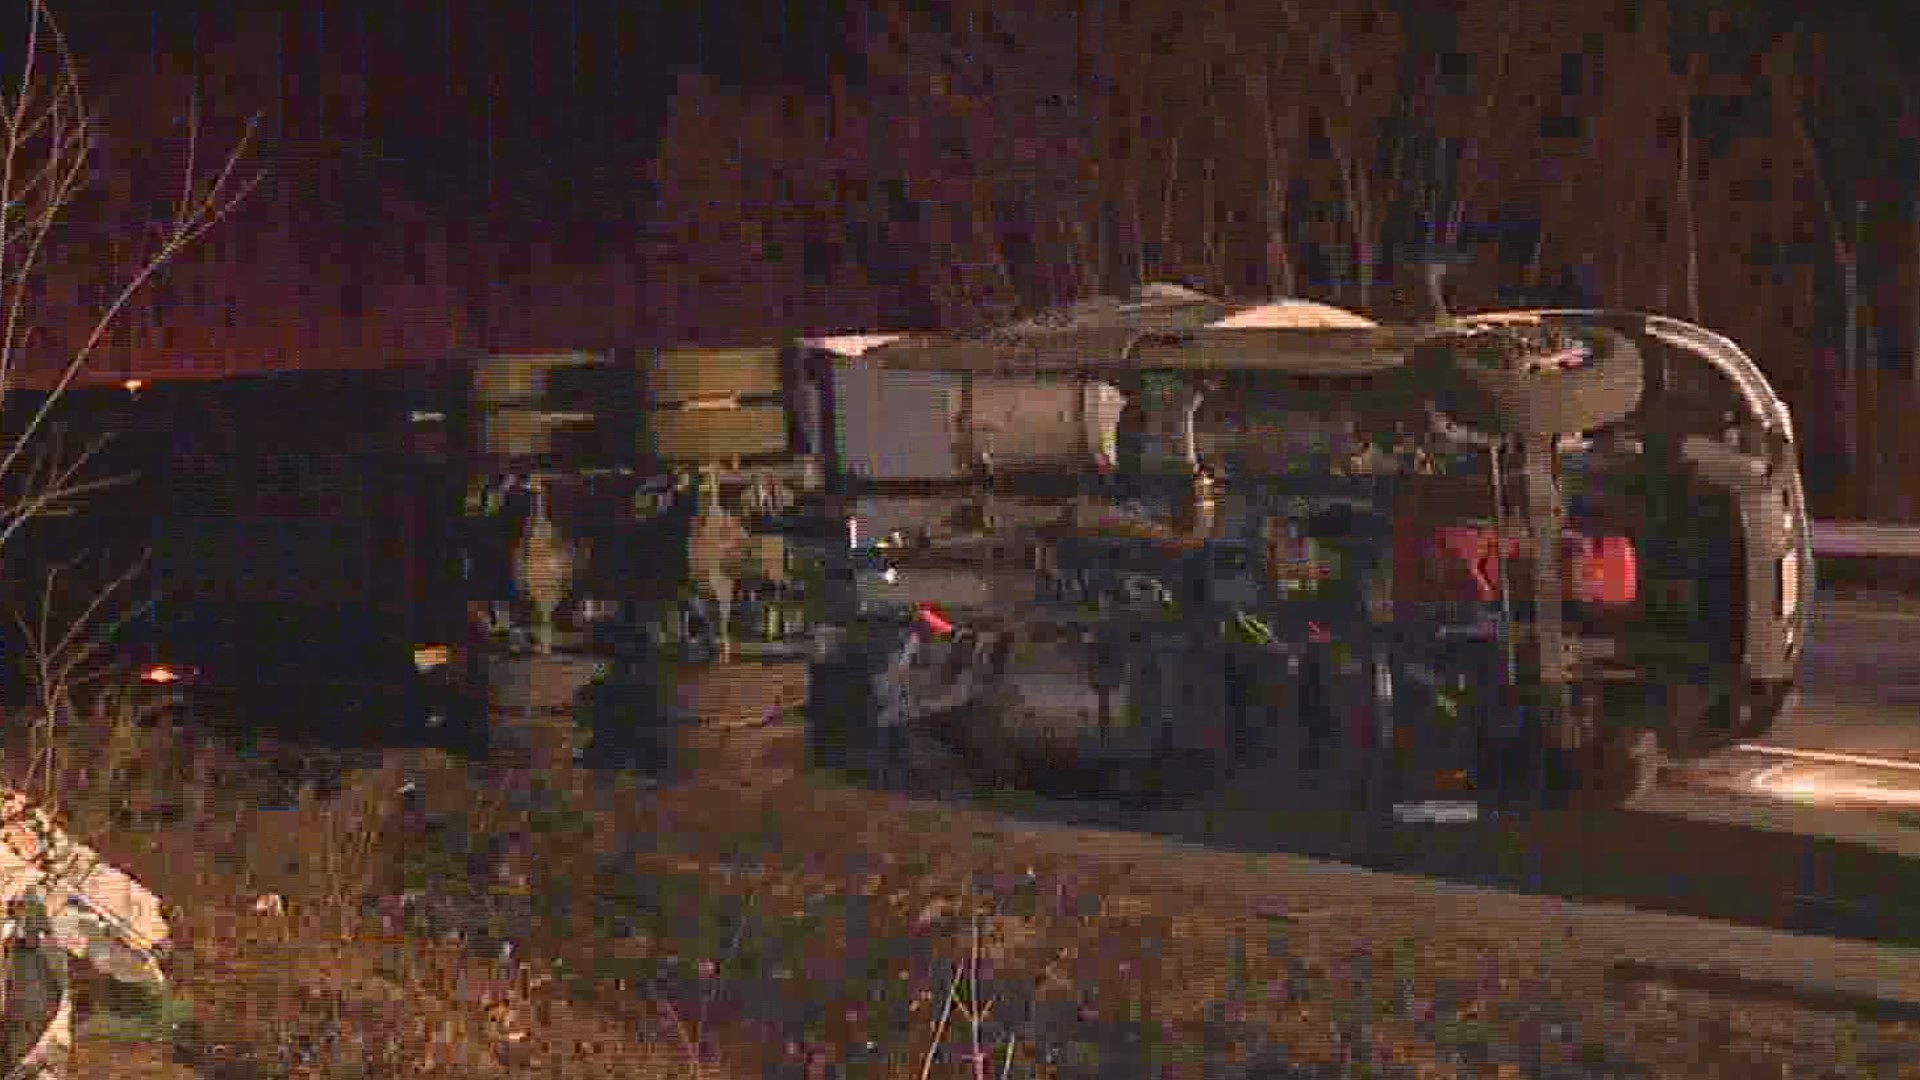 The driver of a tractor trailer was taken to the hospital after a wreck on the interstate in Luzerne County.